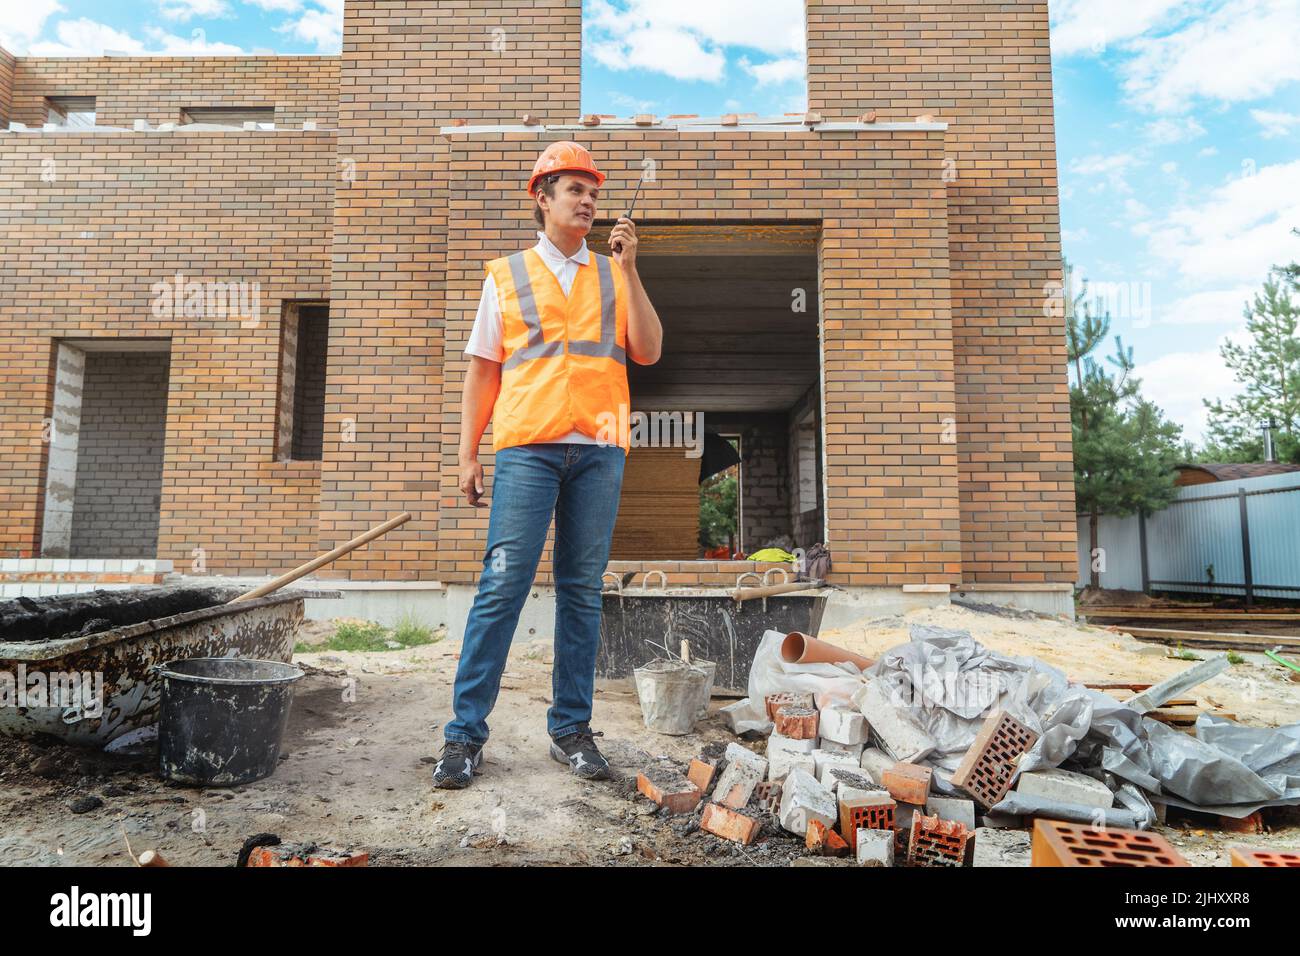 Foreman inspector or construction worker in hardhat portrait. Engineer in helmet with walkie-talkie in hand directs construction process. Stock Photo